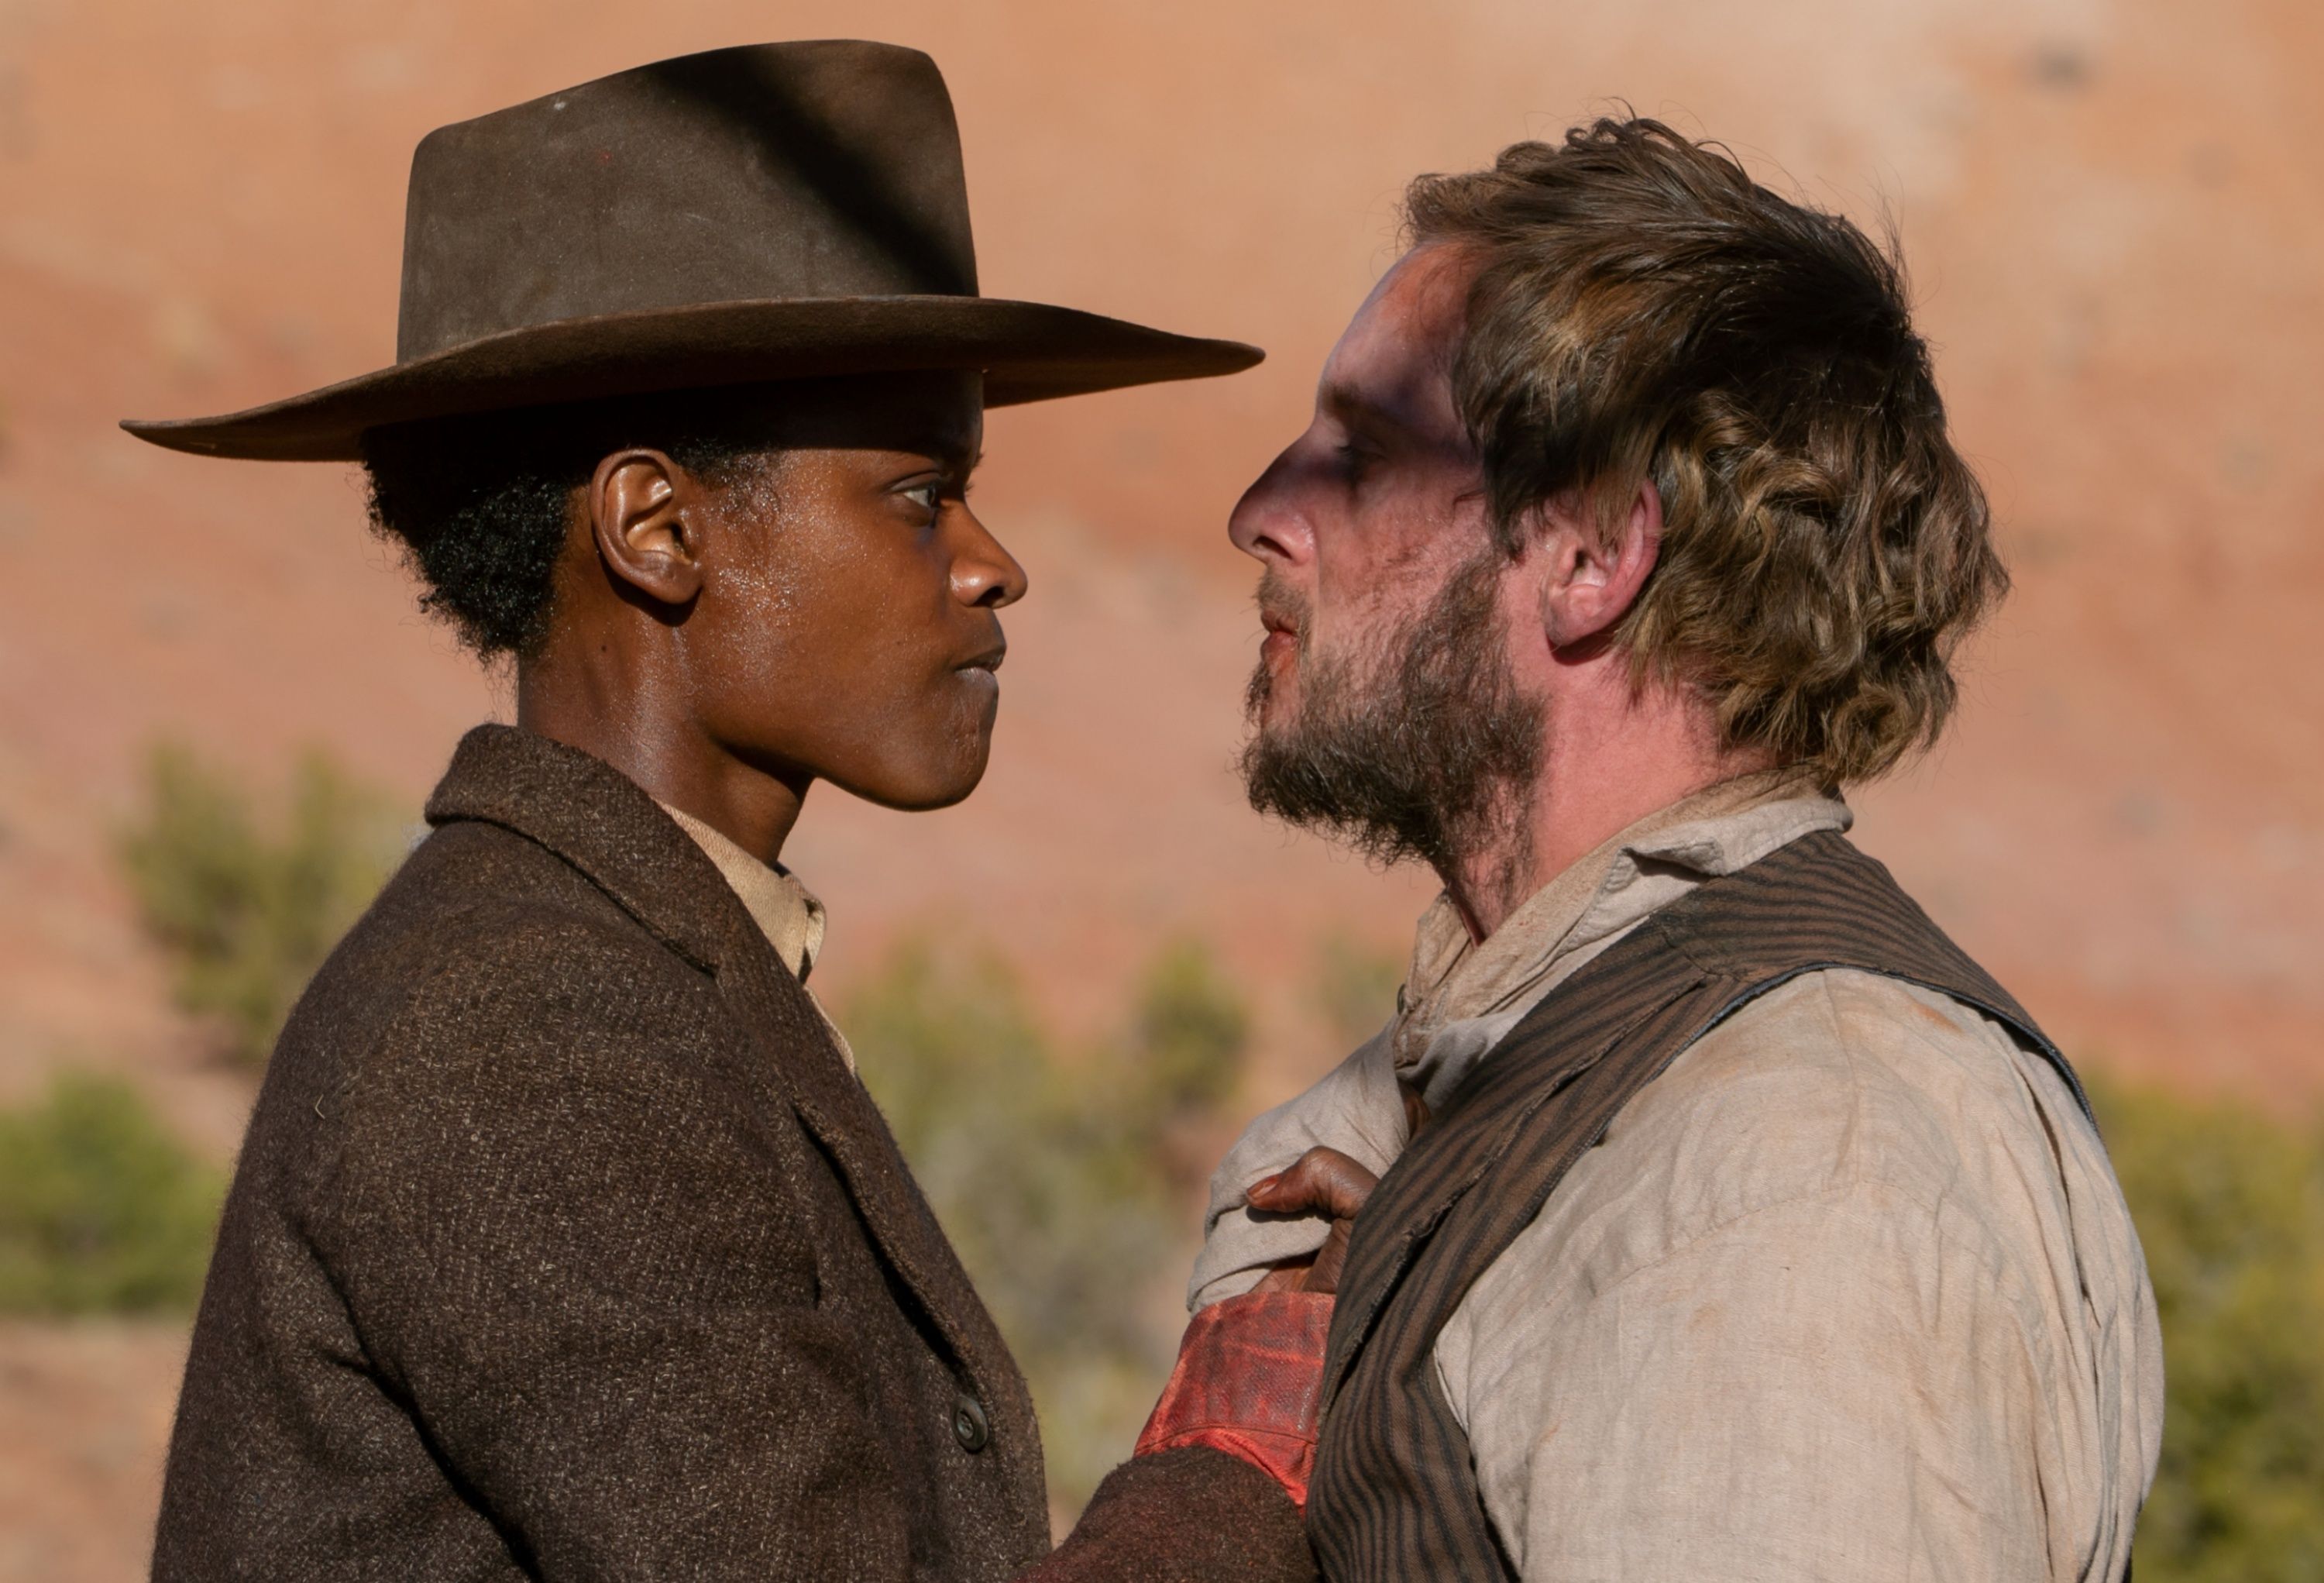 Letitia Wright as Moses “Mo” Washington and Jamie Bell as Tommy Walsh in Surrounded